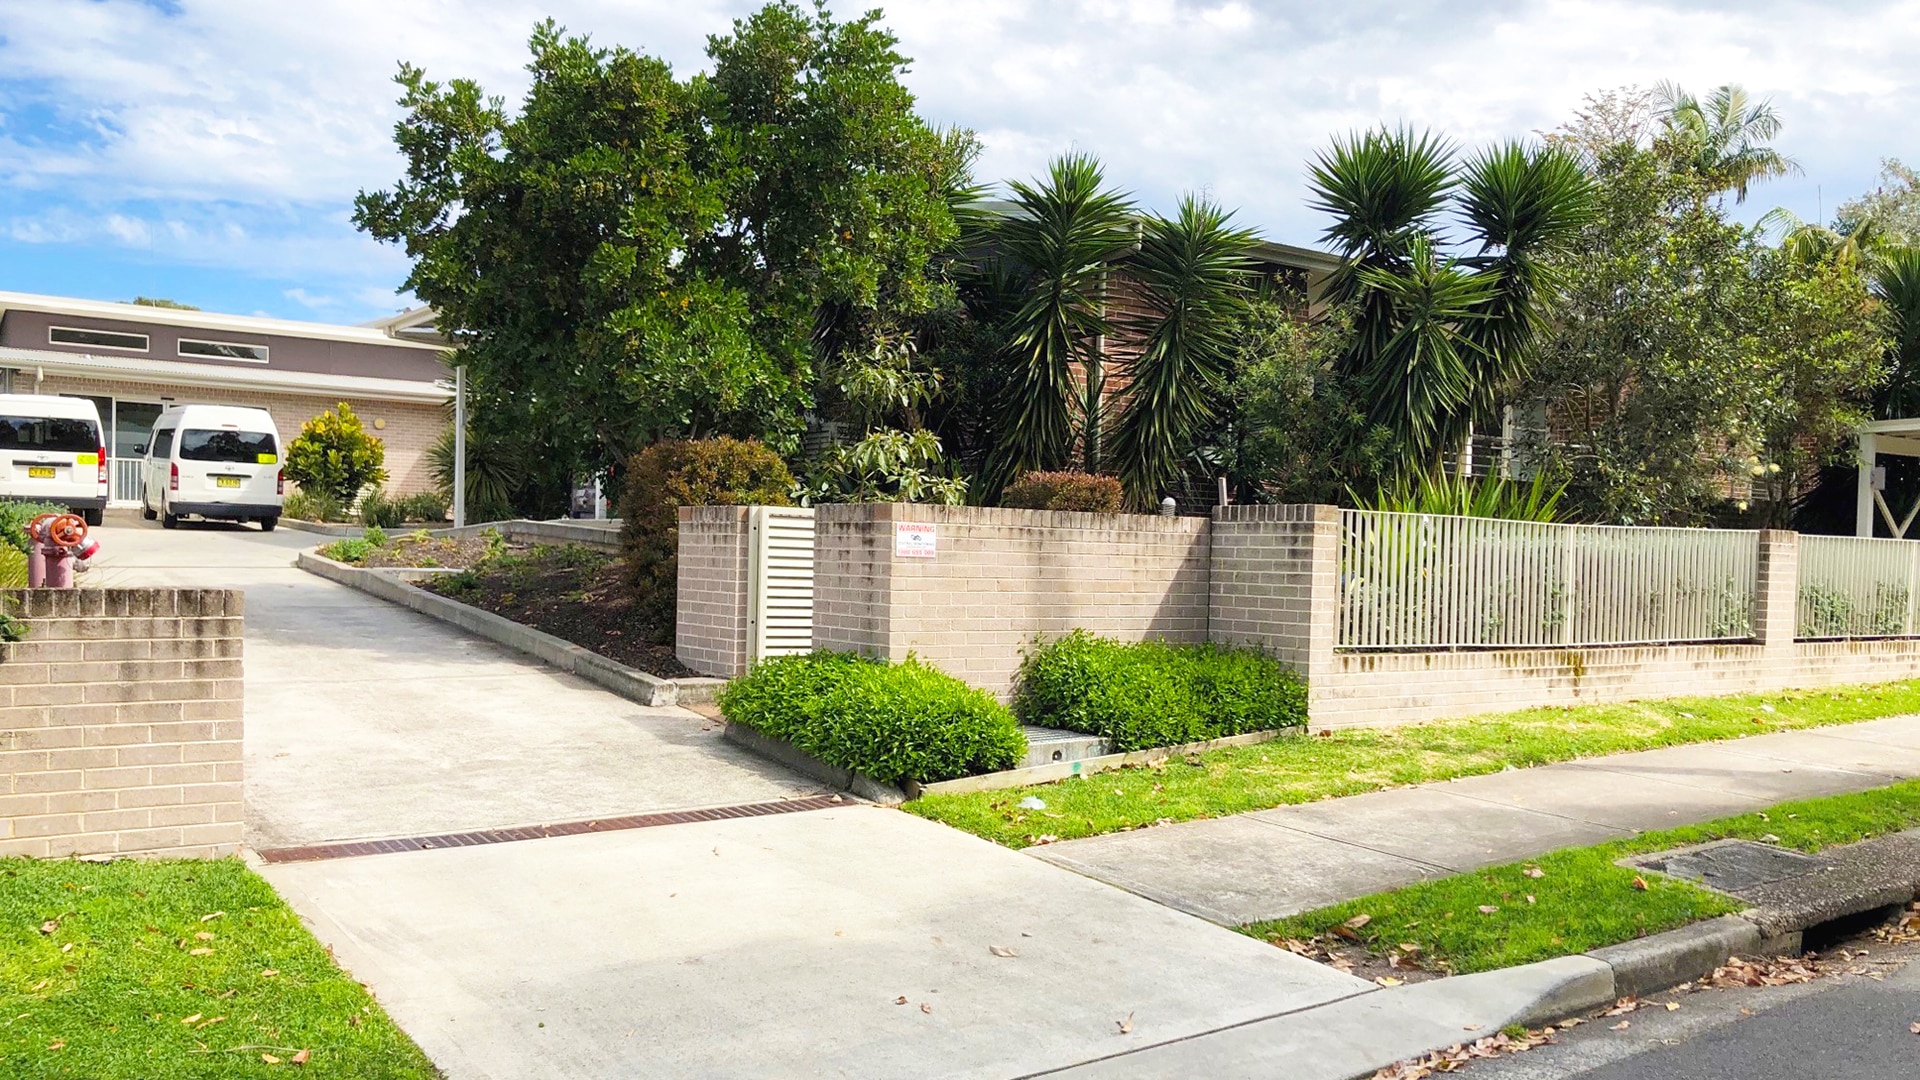 Front view of the Narraweena 2 property. Brick wall with green leafy plants behind it and a driveway leading up to parked vans with a building behind it.